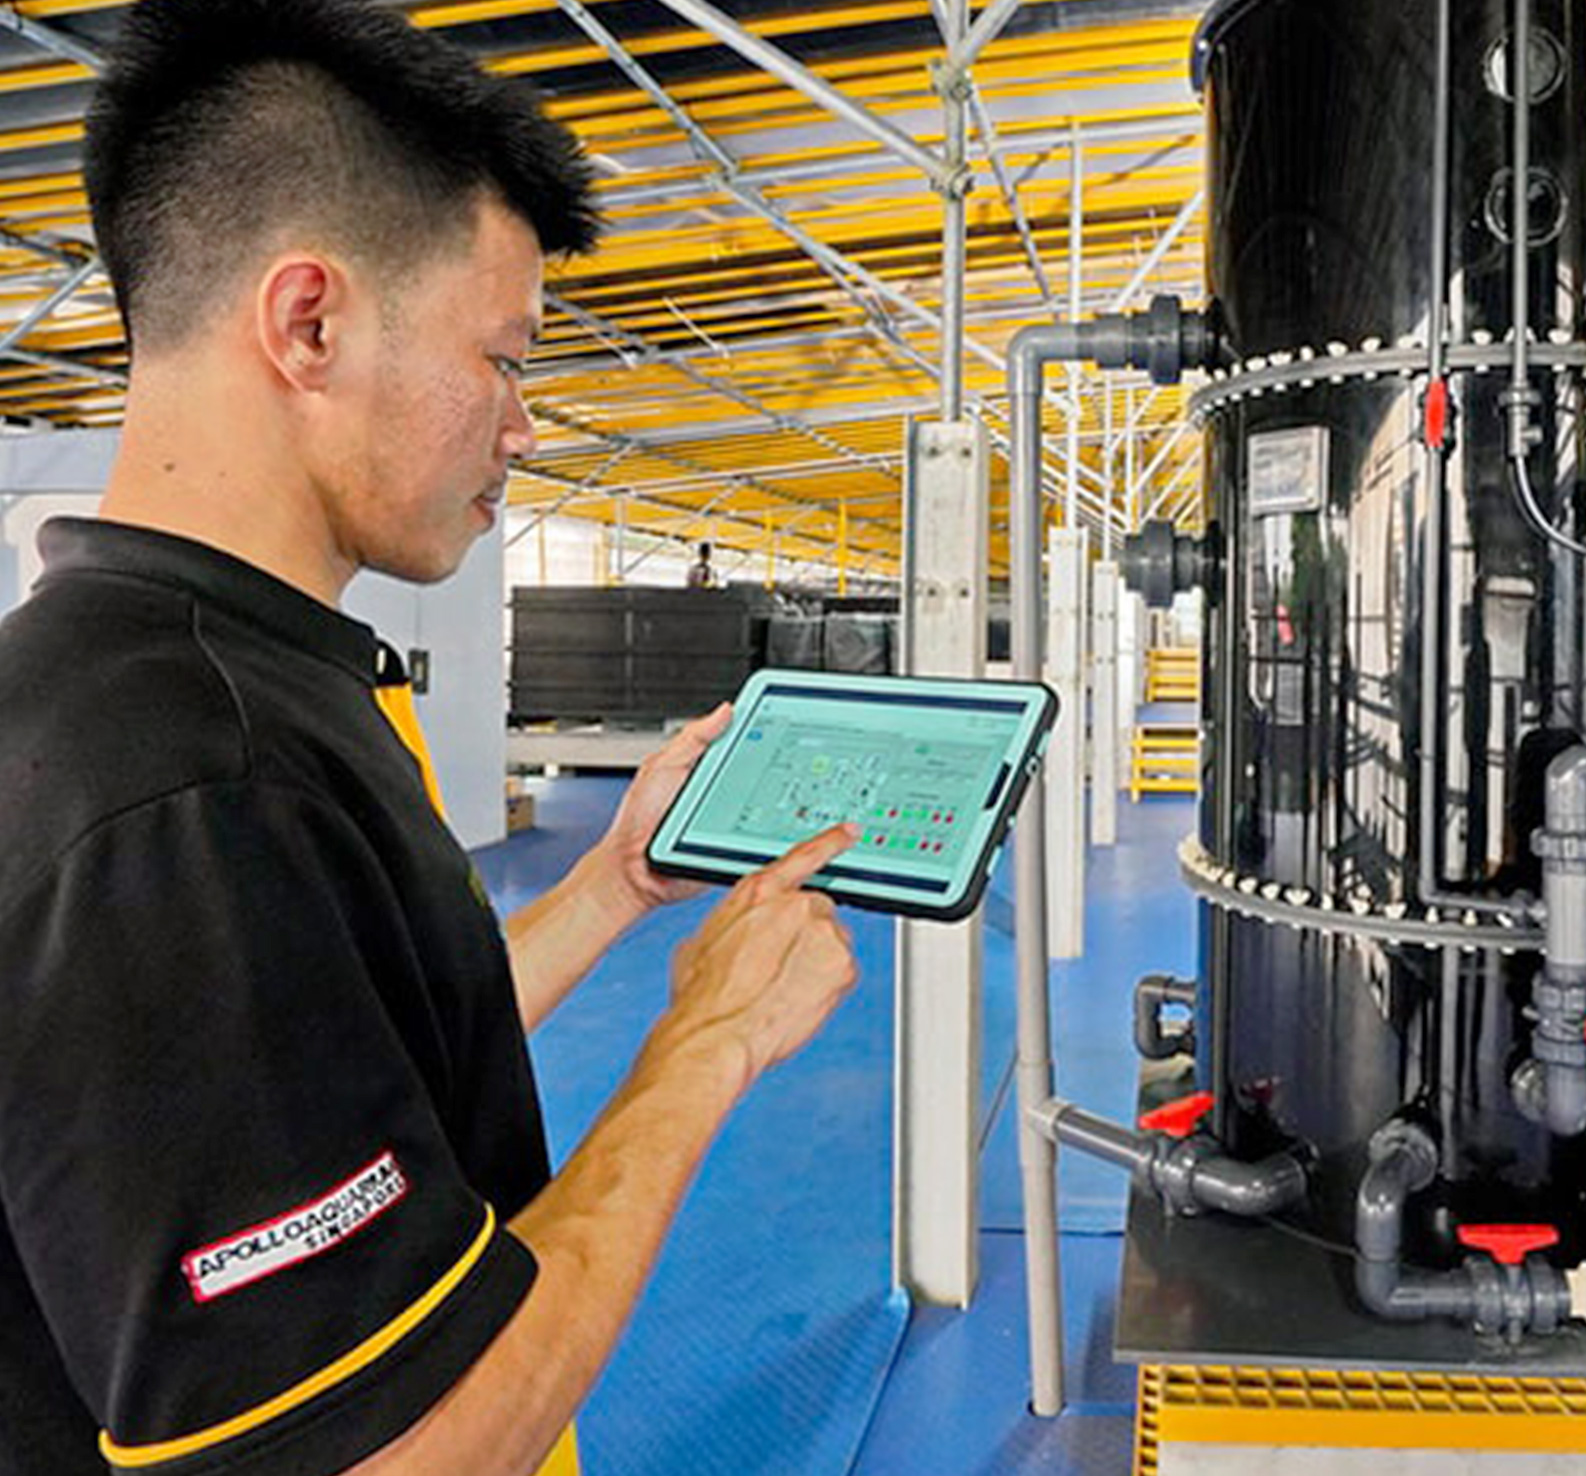 Man uses a tablet device to perform checks on advanced manufacturing equipment